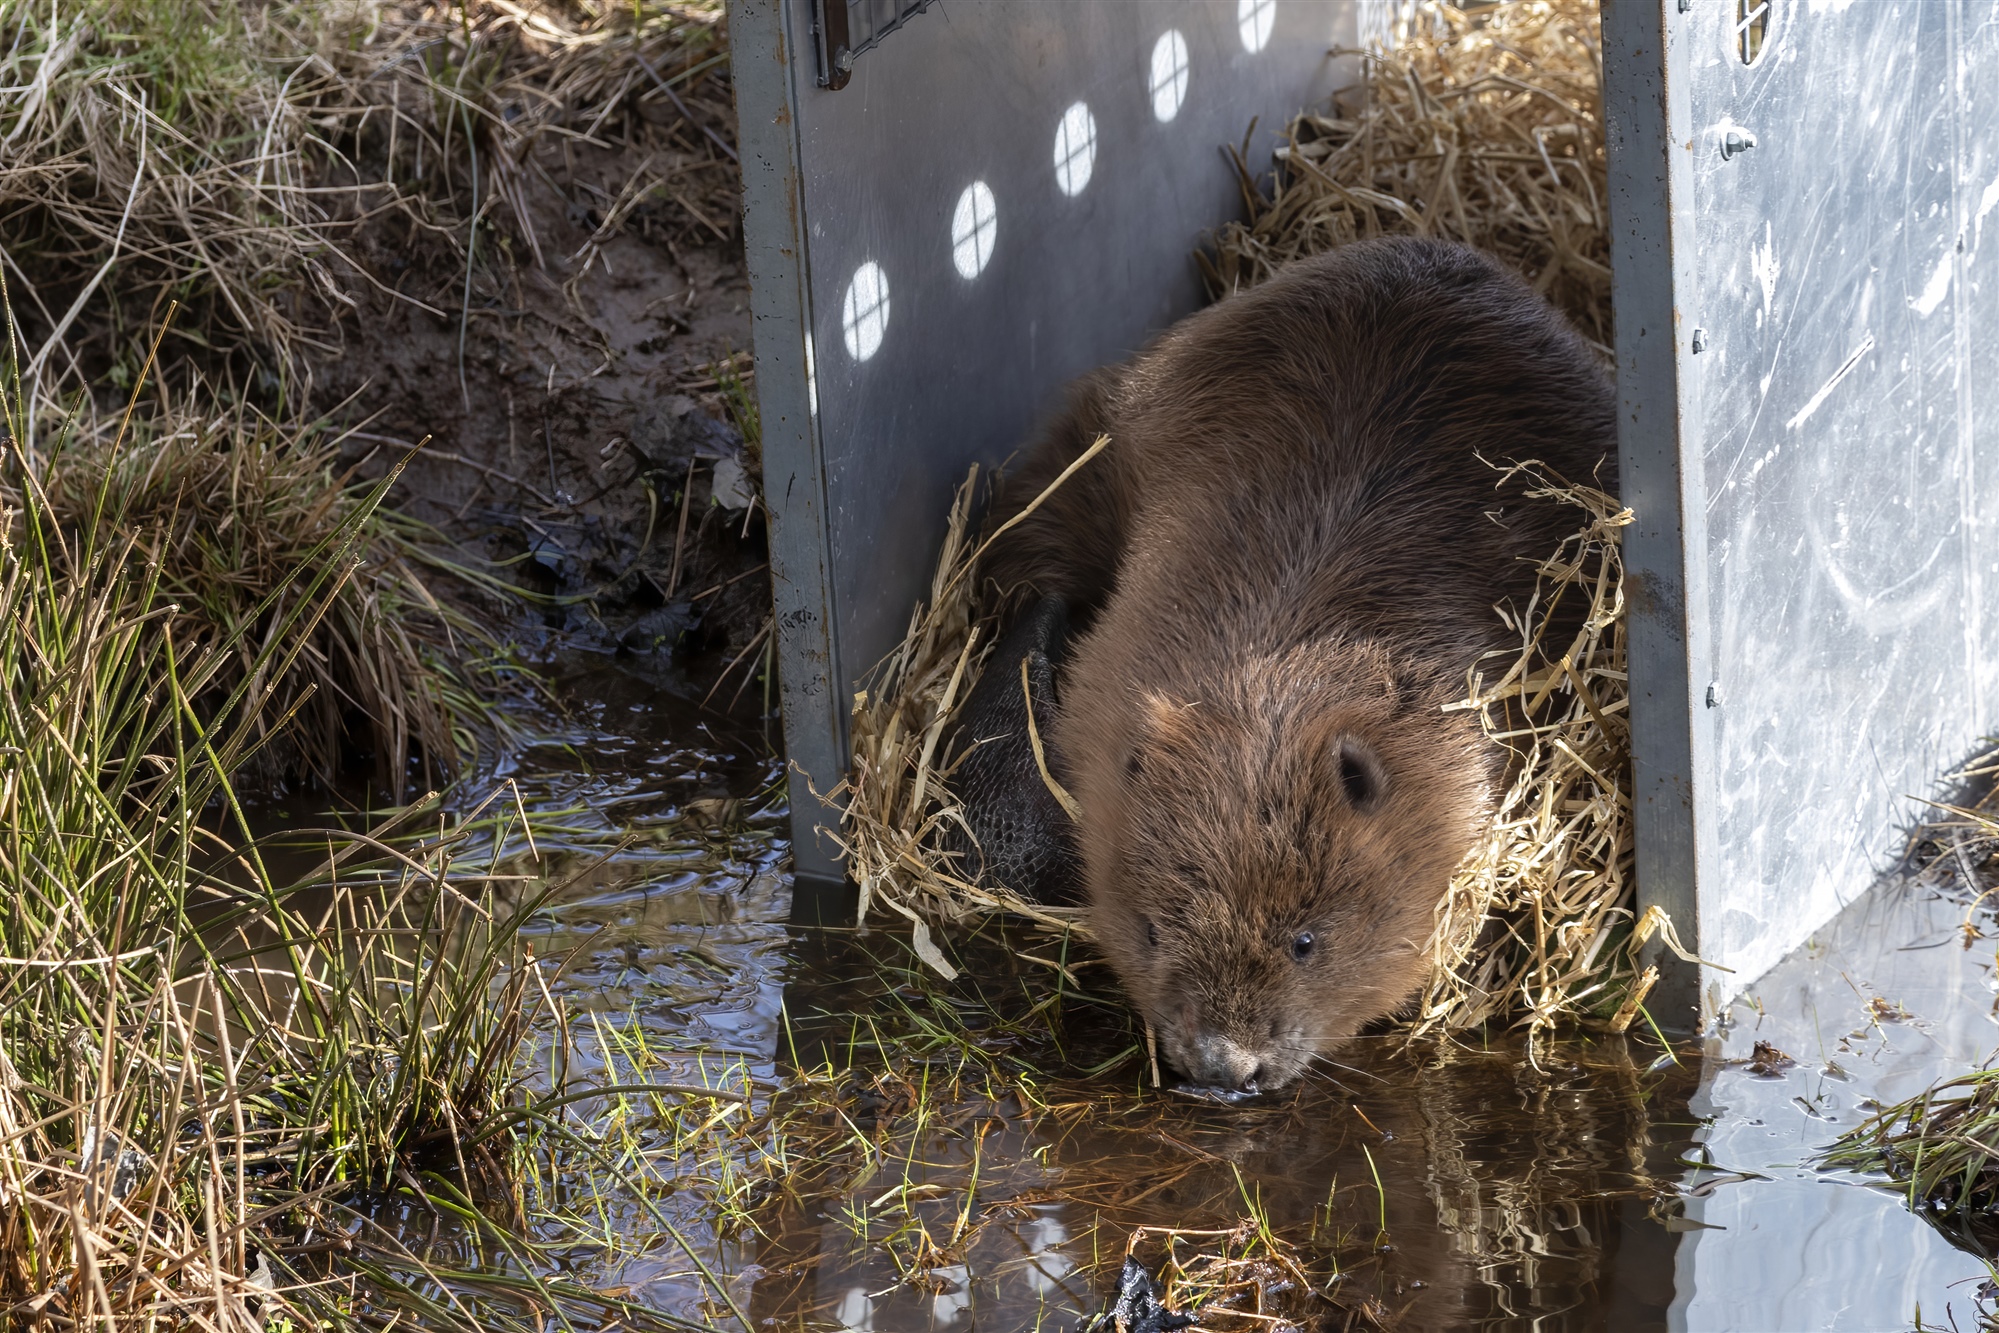 A Beaver poking its face out of the large metal crate.